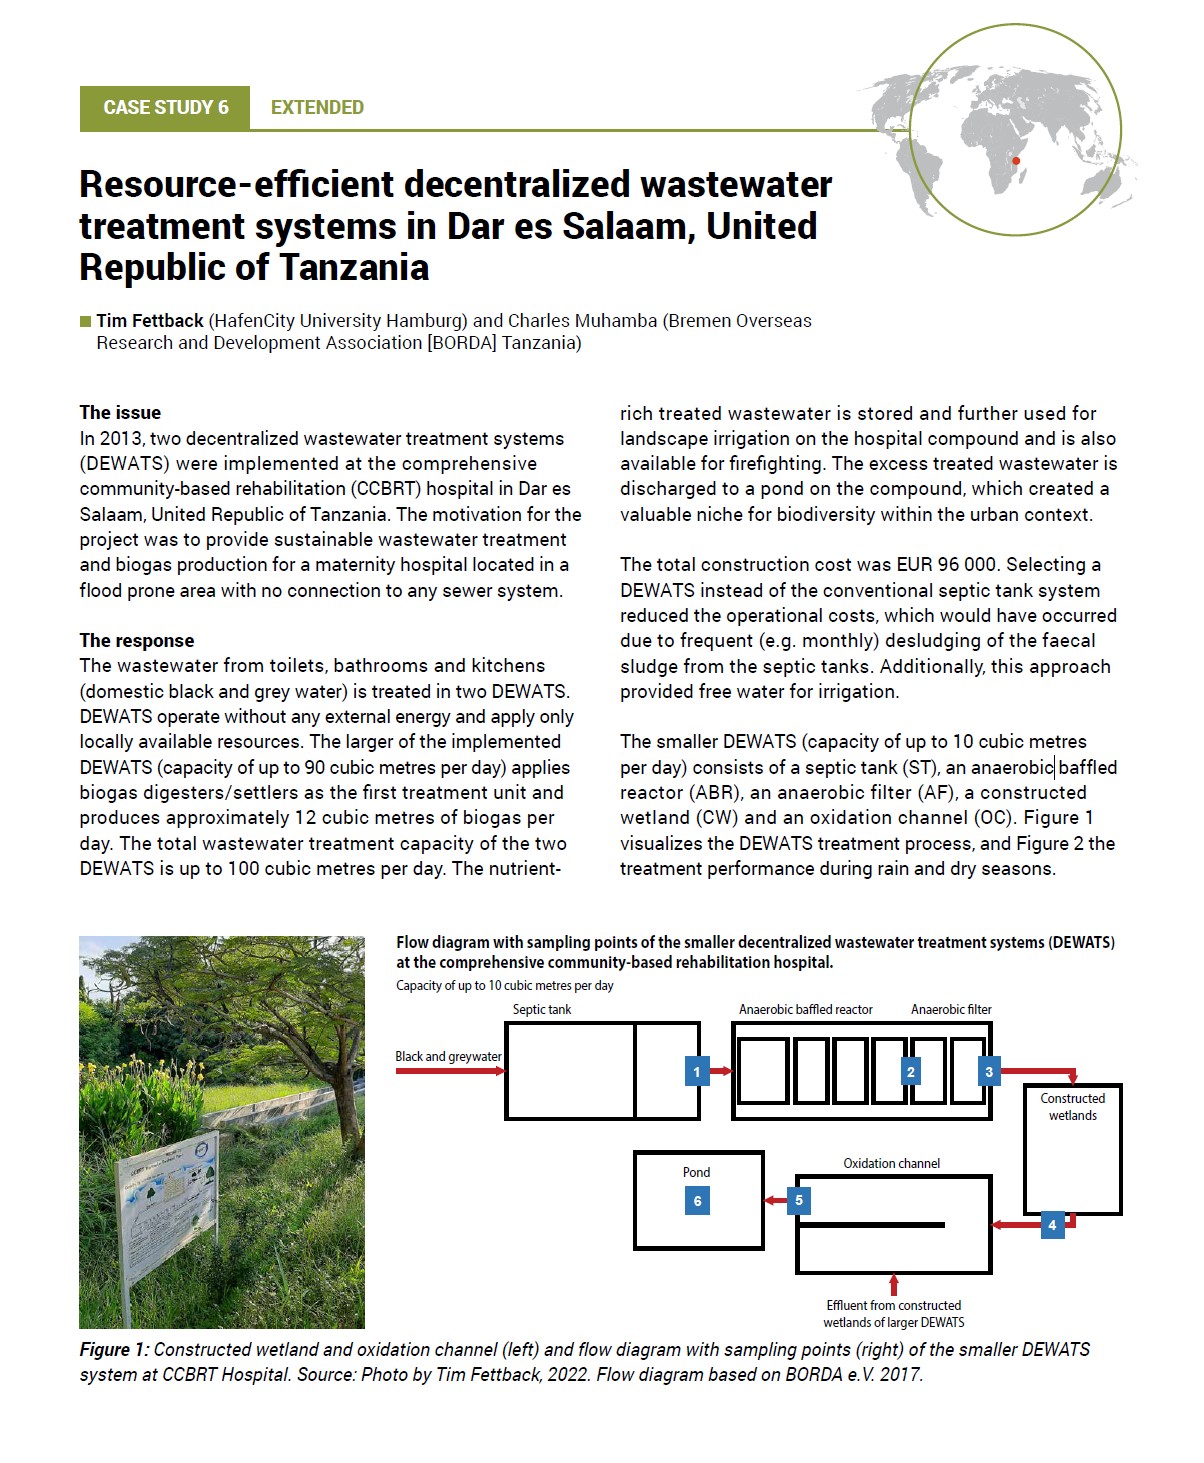 Case Study 6: Resource-efficient decentralized wastewater treatment systems in Dar es Salaam, United Republic of Tanzania